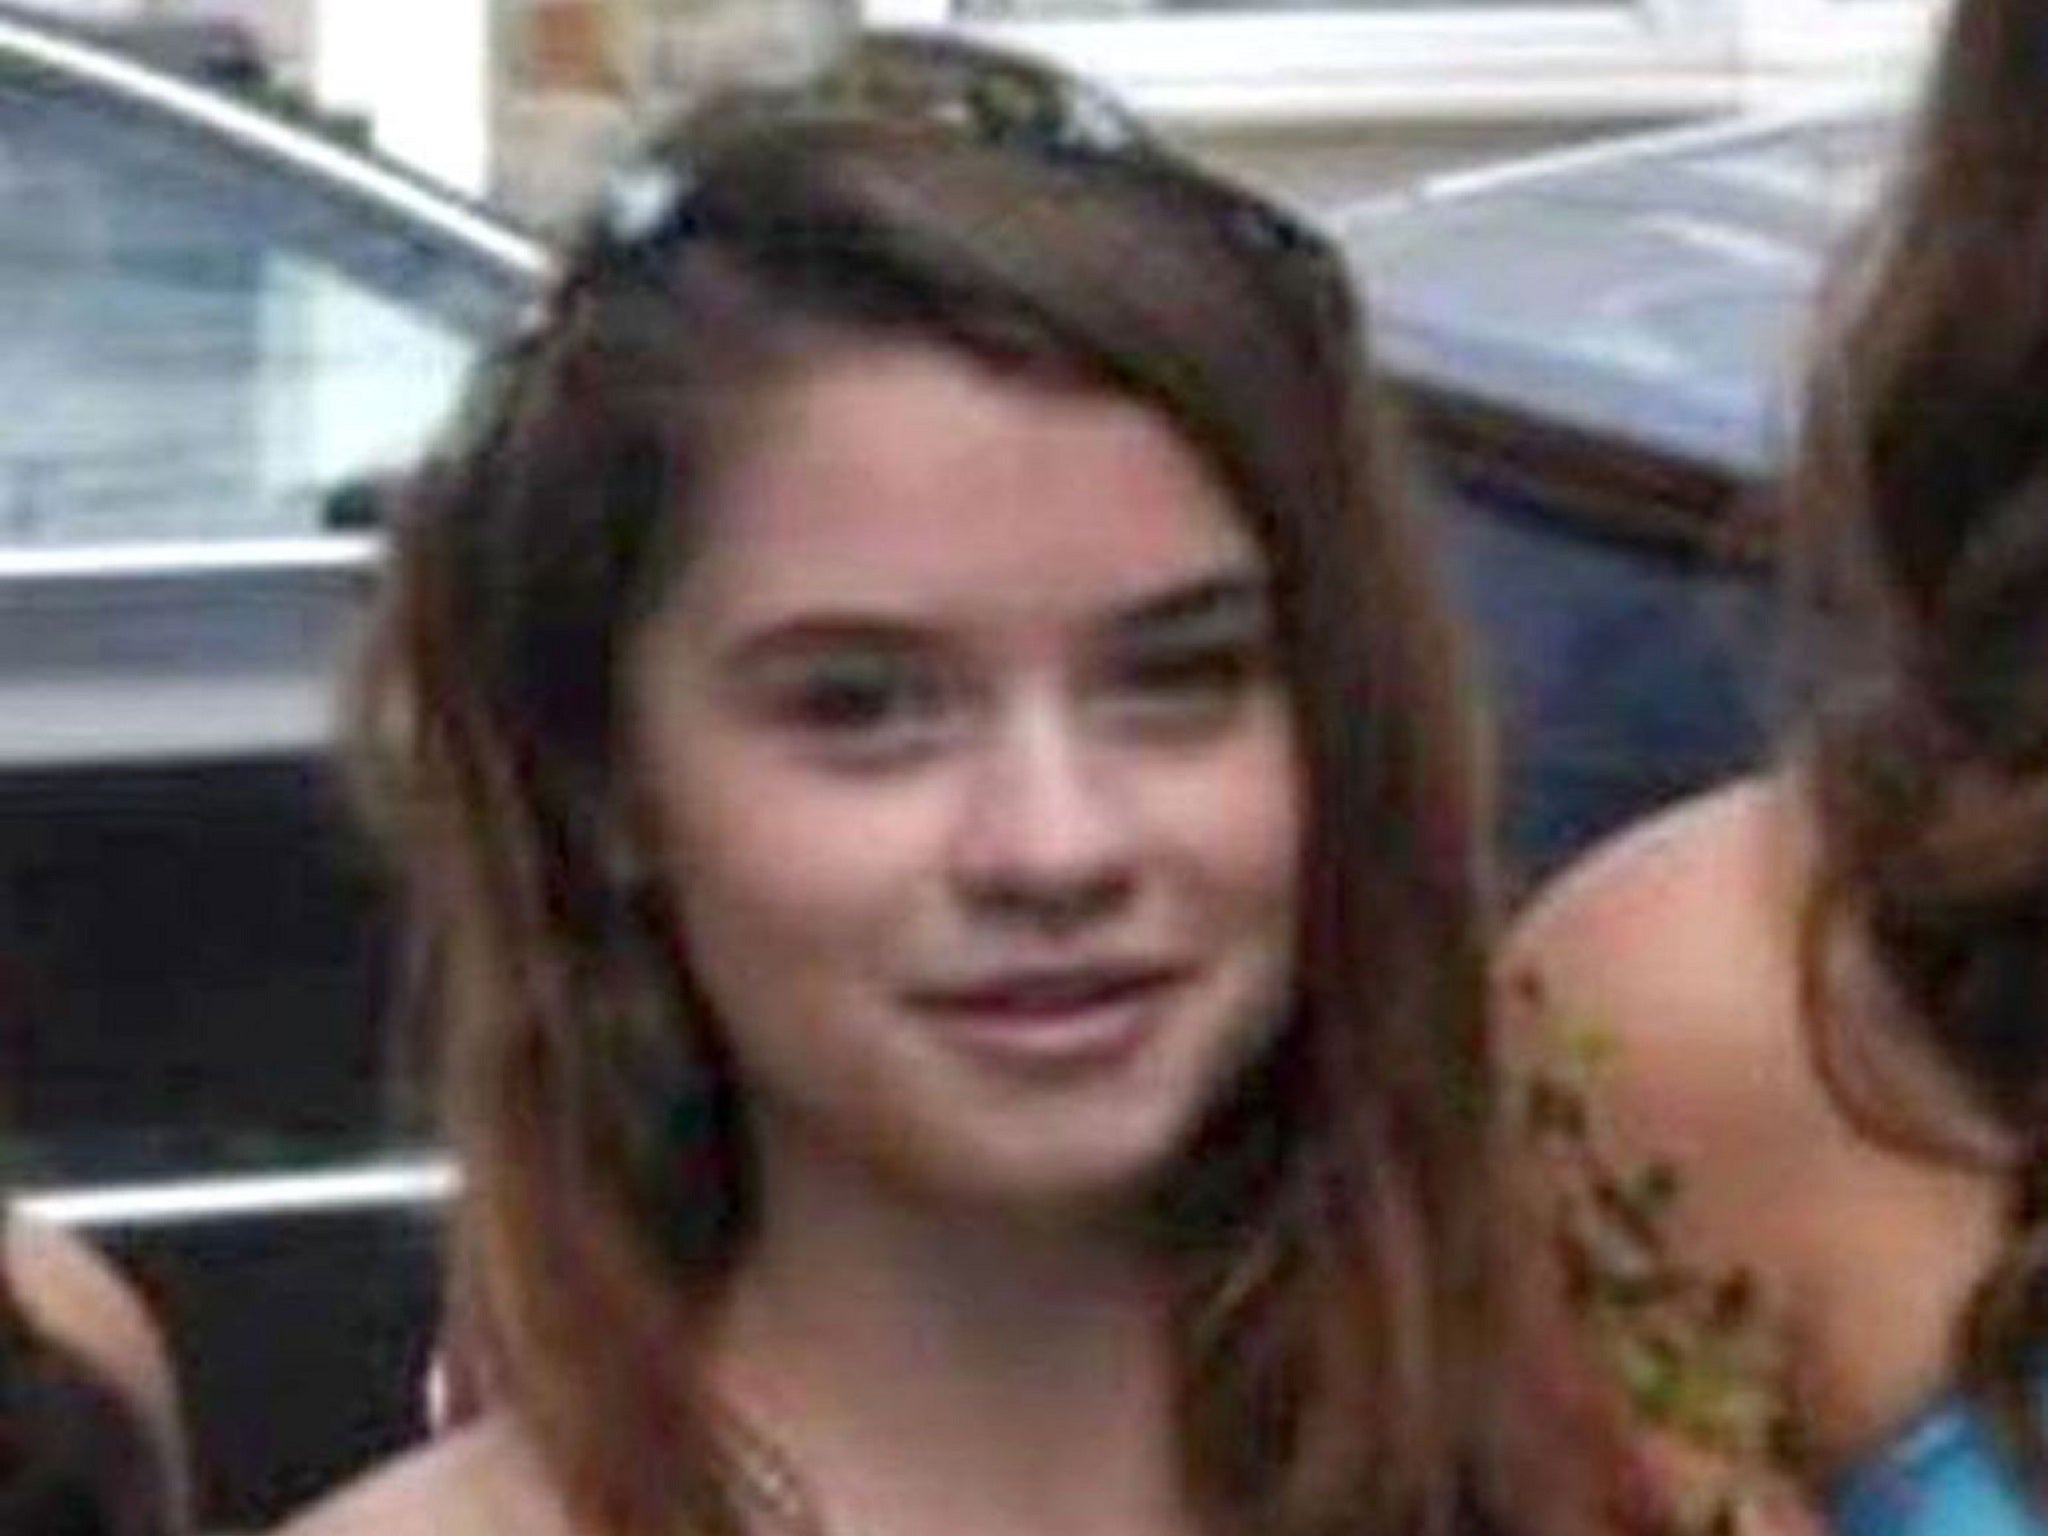 Rebecca Watts, 16, was last seen at her home in St George, Bristol at around 11.15am Thursday 19 February